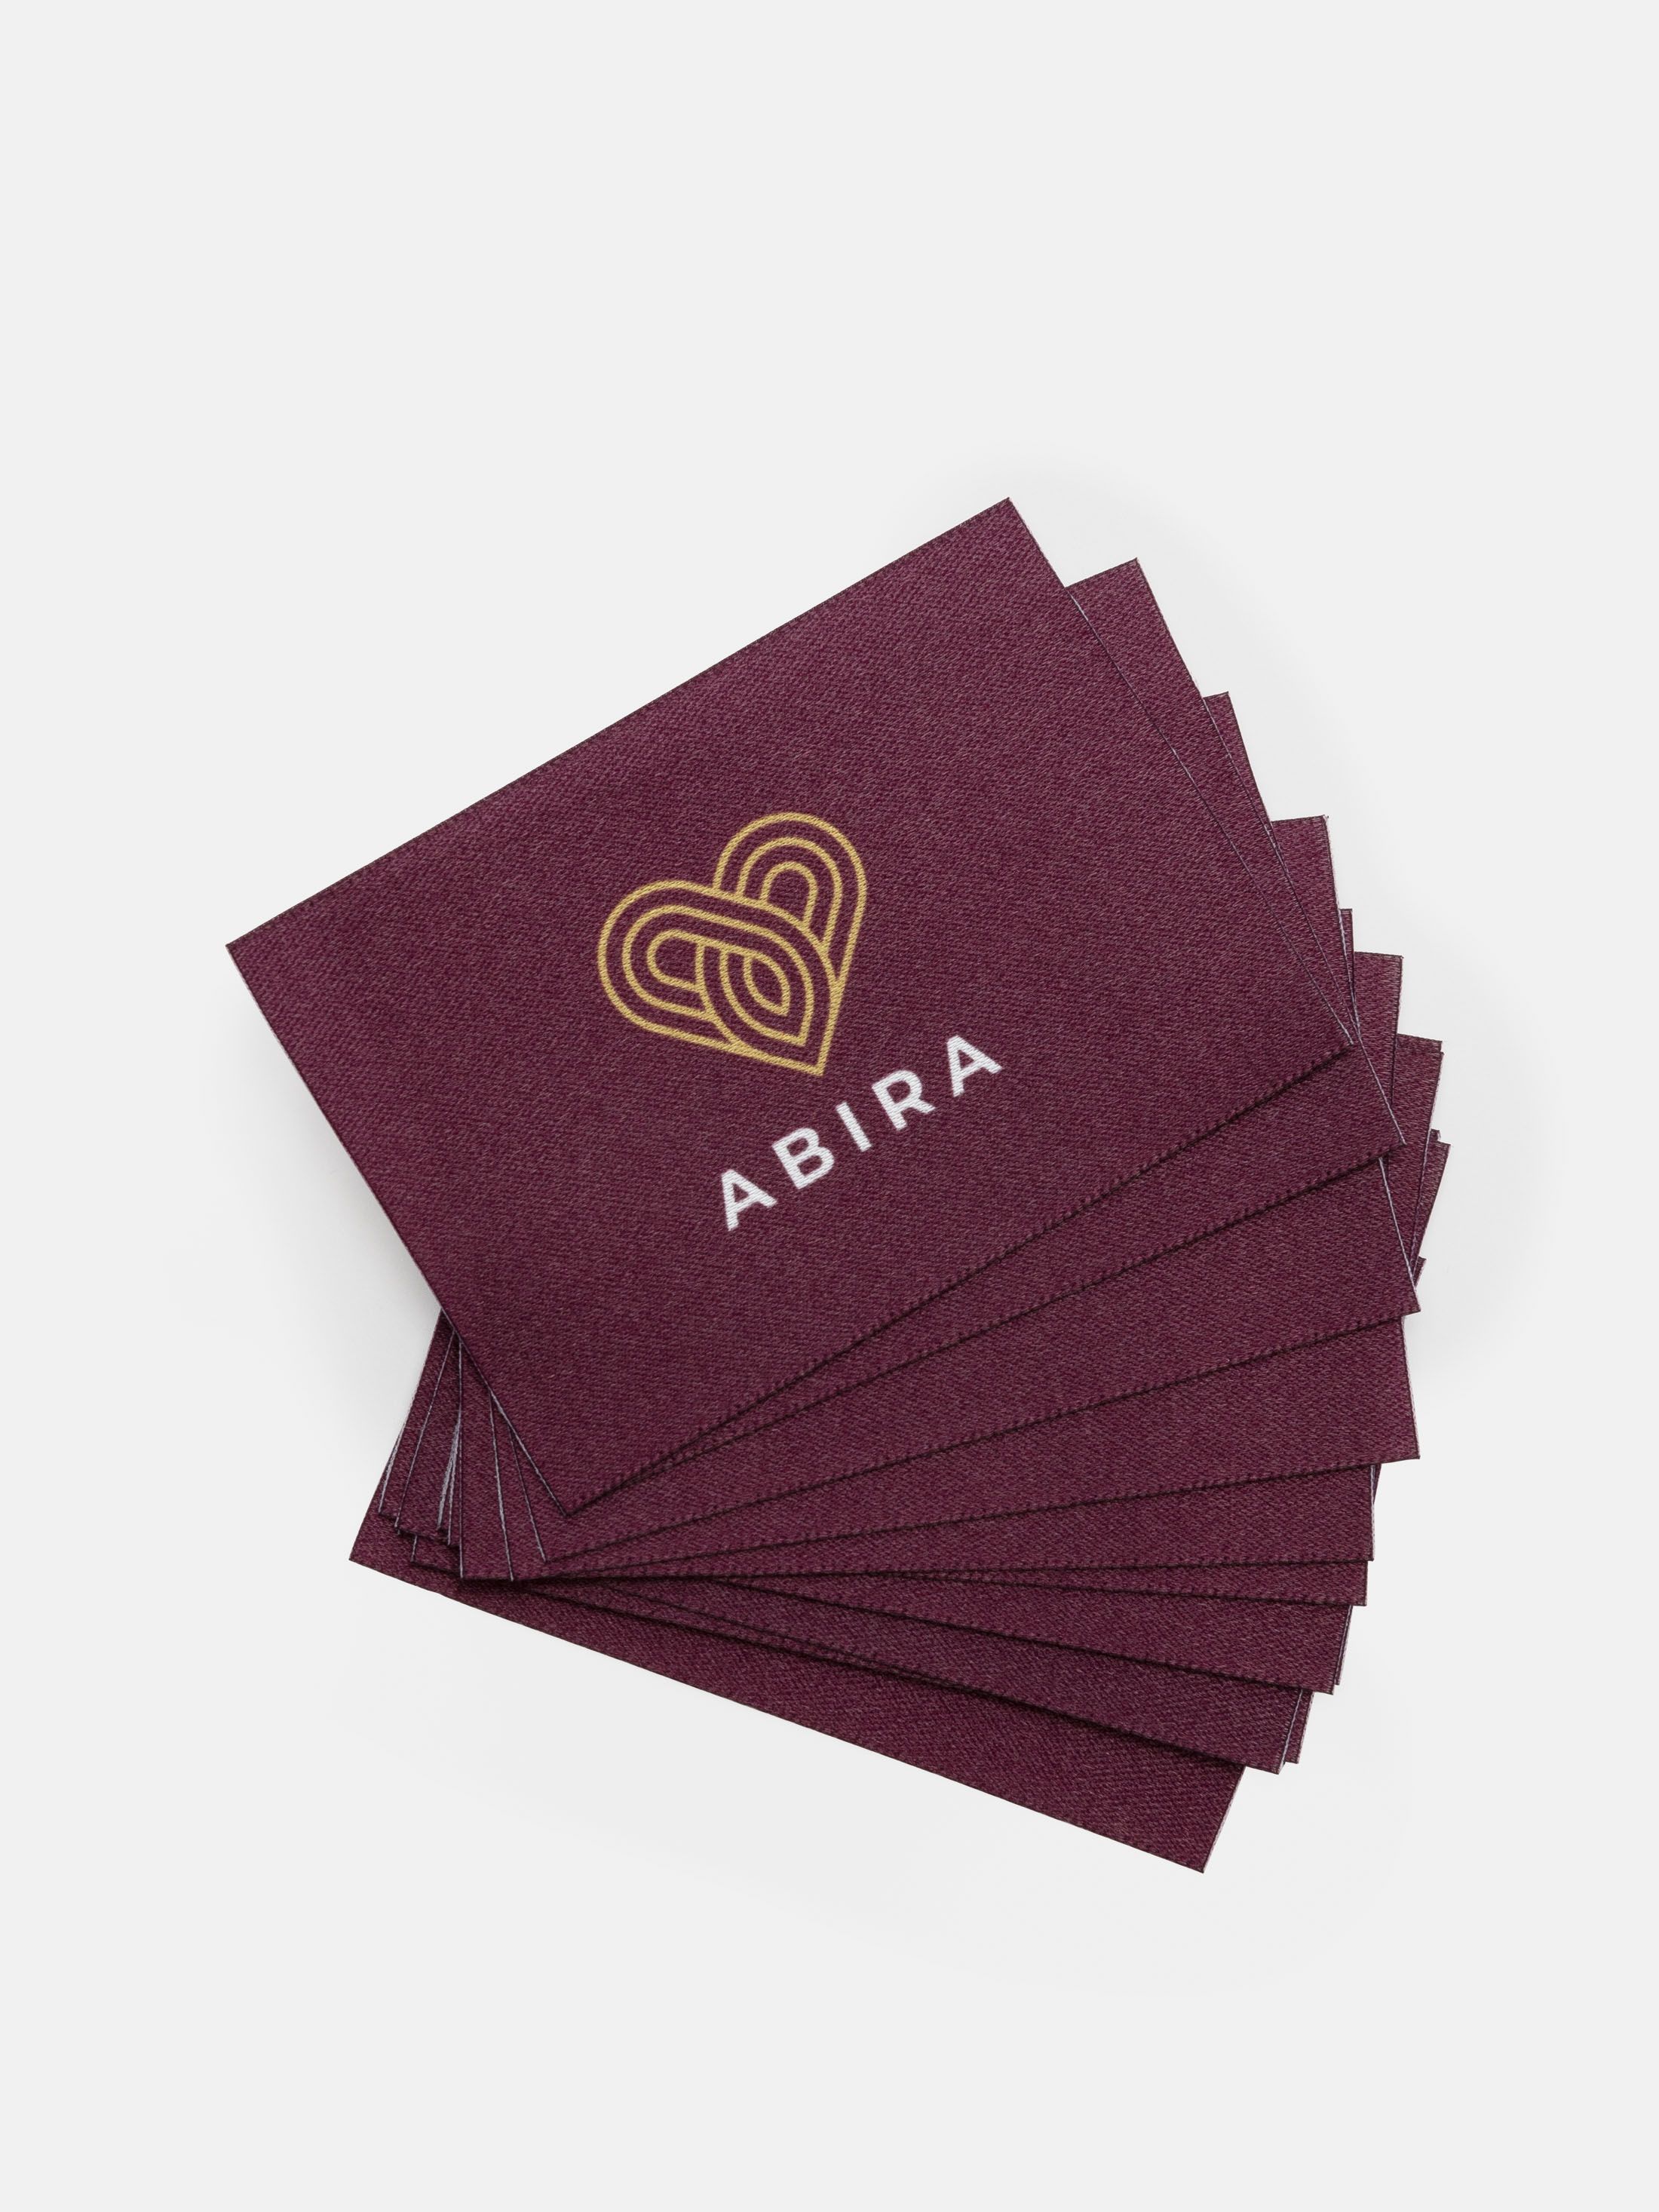 fabric labels with logo